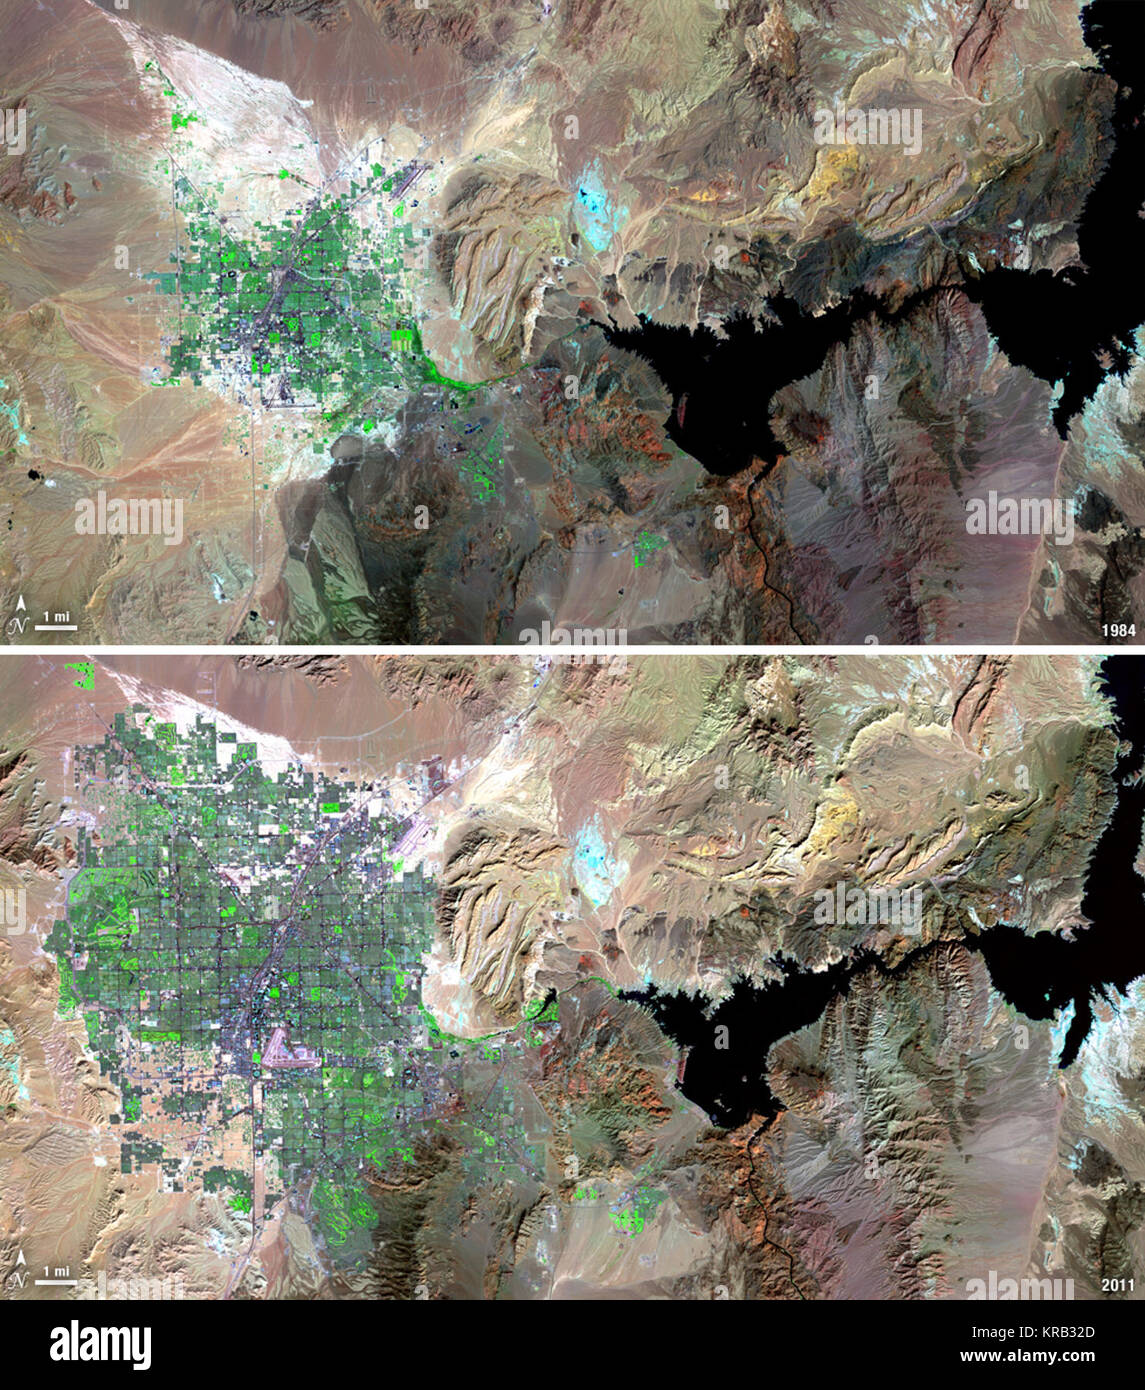 Over the years of the Landsat program, the desert city of Las Vegas has gone through a massive growth spurt. The outward expansion of the city over the last quarter of a century is shown here with two false-color Landsat 5 images (August 3, 1984, and November 2, 2011).  The dark purple grid of city streets and the green of irrigated vegetation grow out in every direction into the surrounding desert. These images were created using reflected light from the shortwave infrared, near-infrared, and green portions of the electromagnetic spectrum (Landsat 5 TM bands 7,4,2).  ----  NASA and the U.S. D Stock Photo